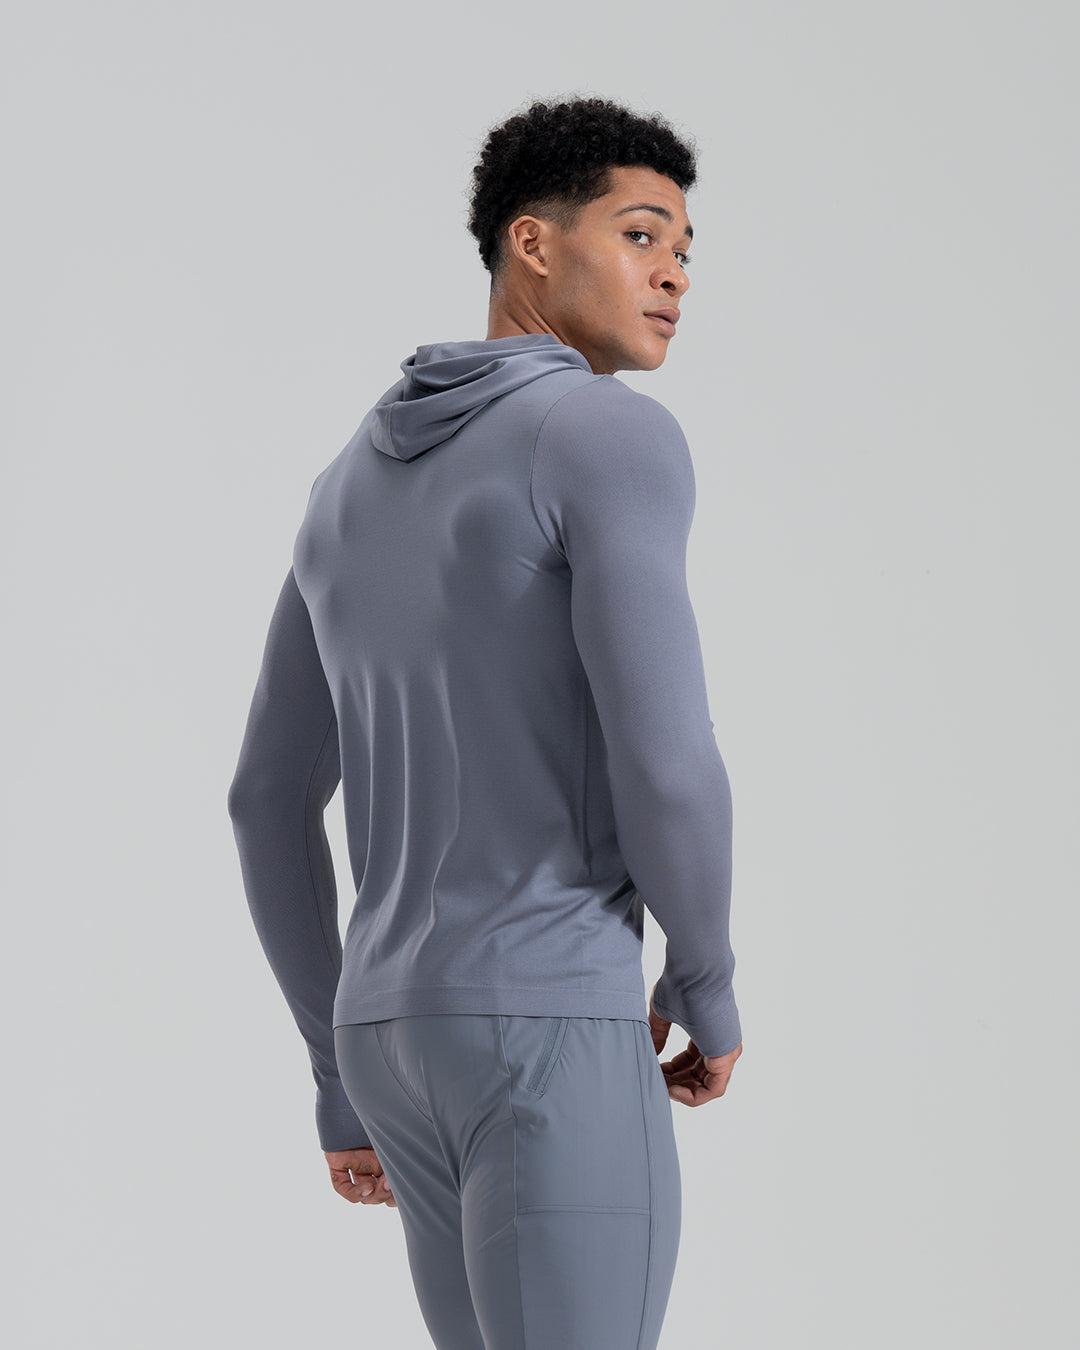 FlowState Hooded Long Sleeve Training Top